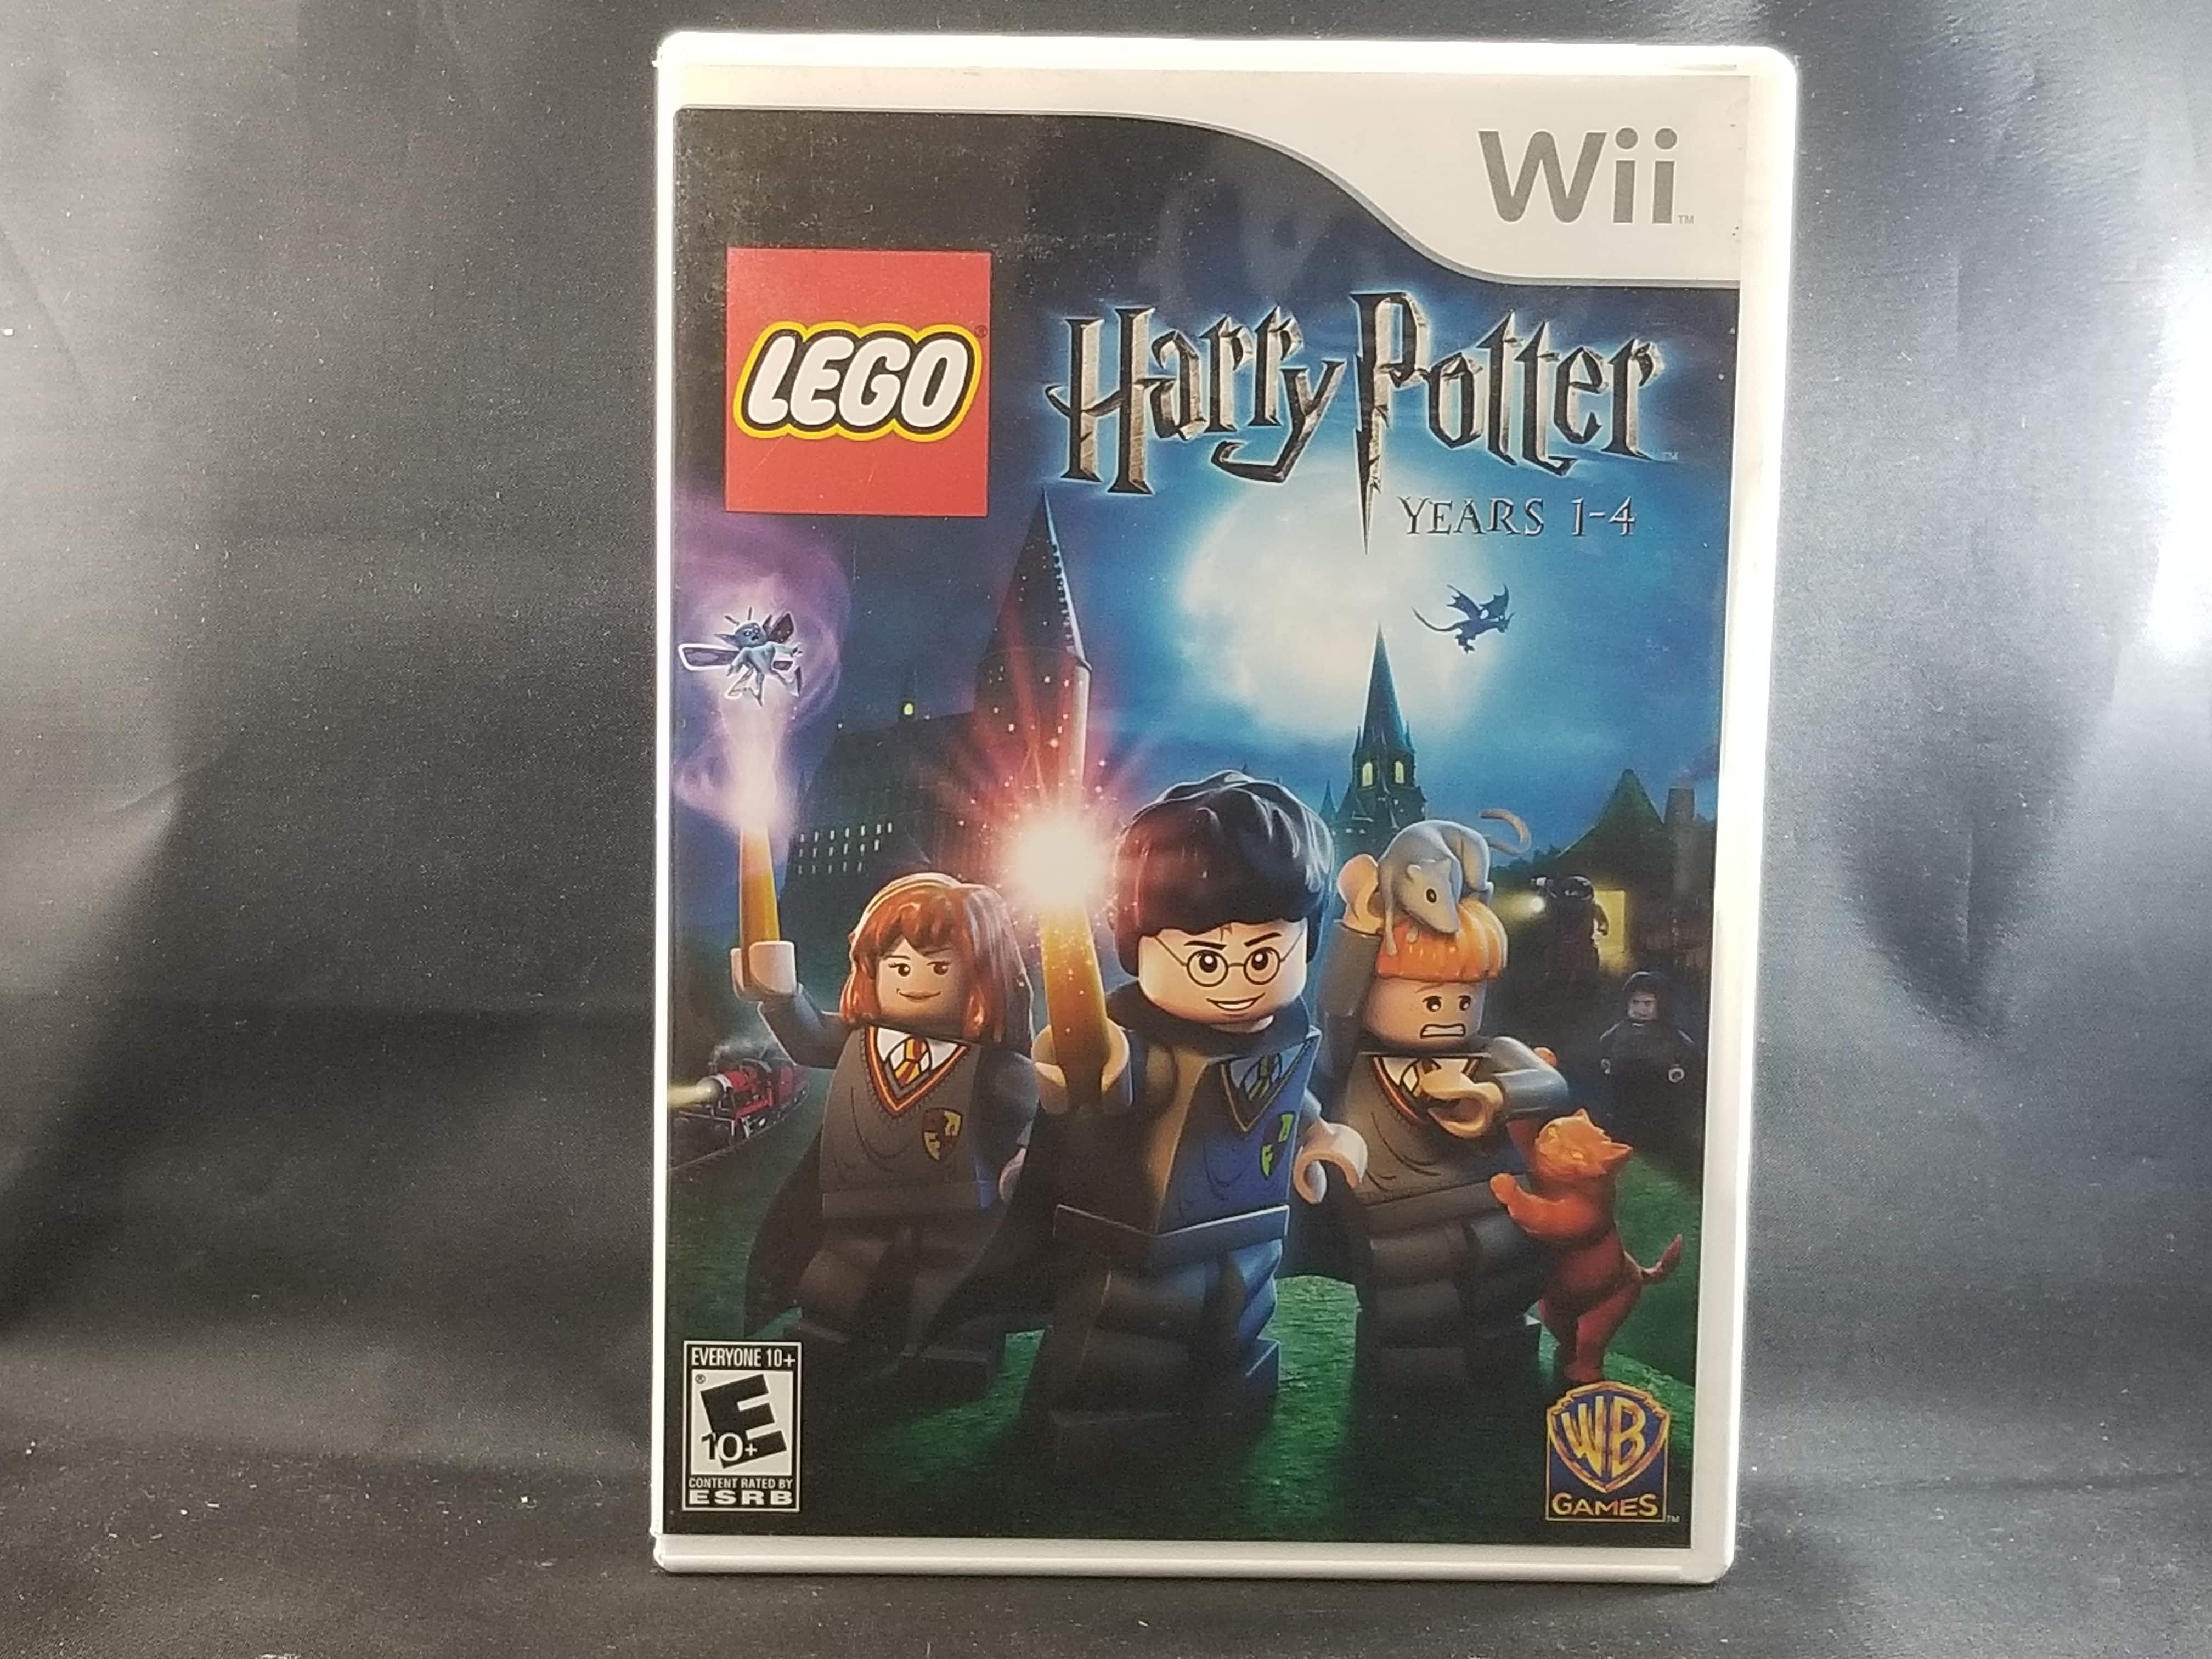  LEGO Harry Potter: Years 1-4 - Nintendo Wii : Whv Games: Toys &  Games